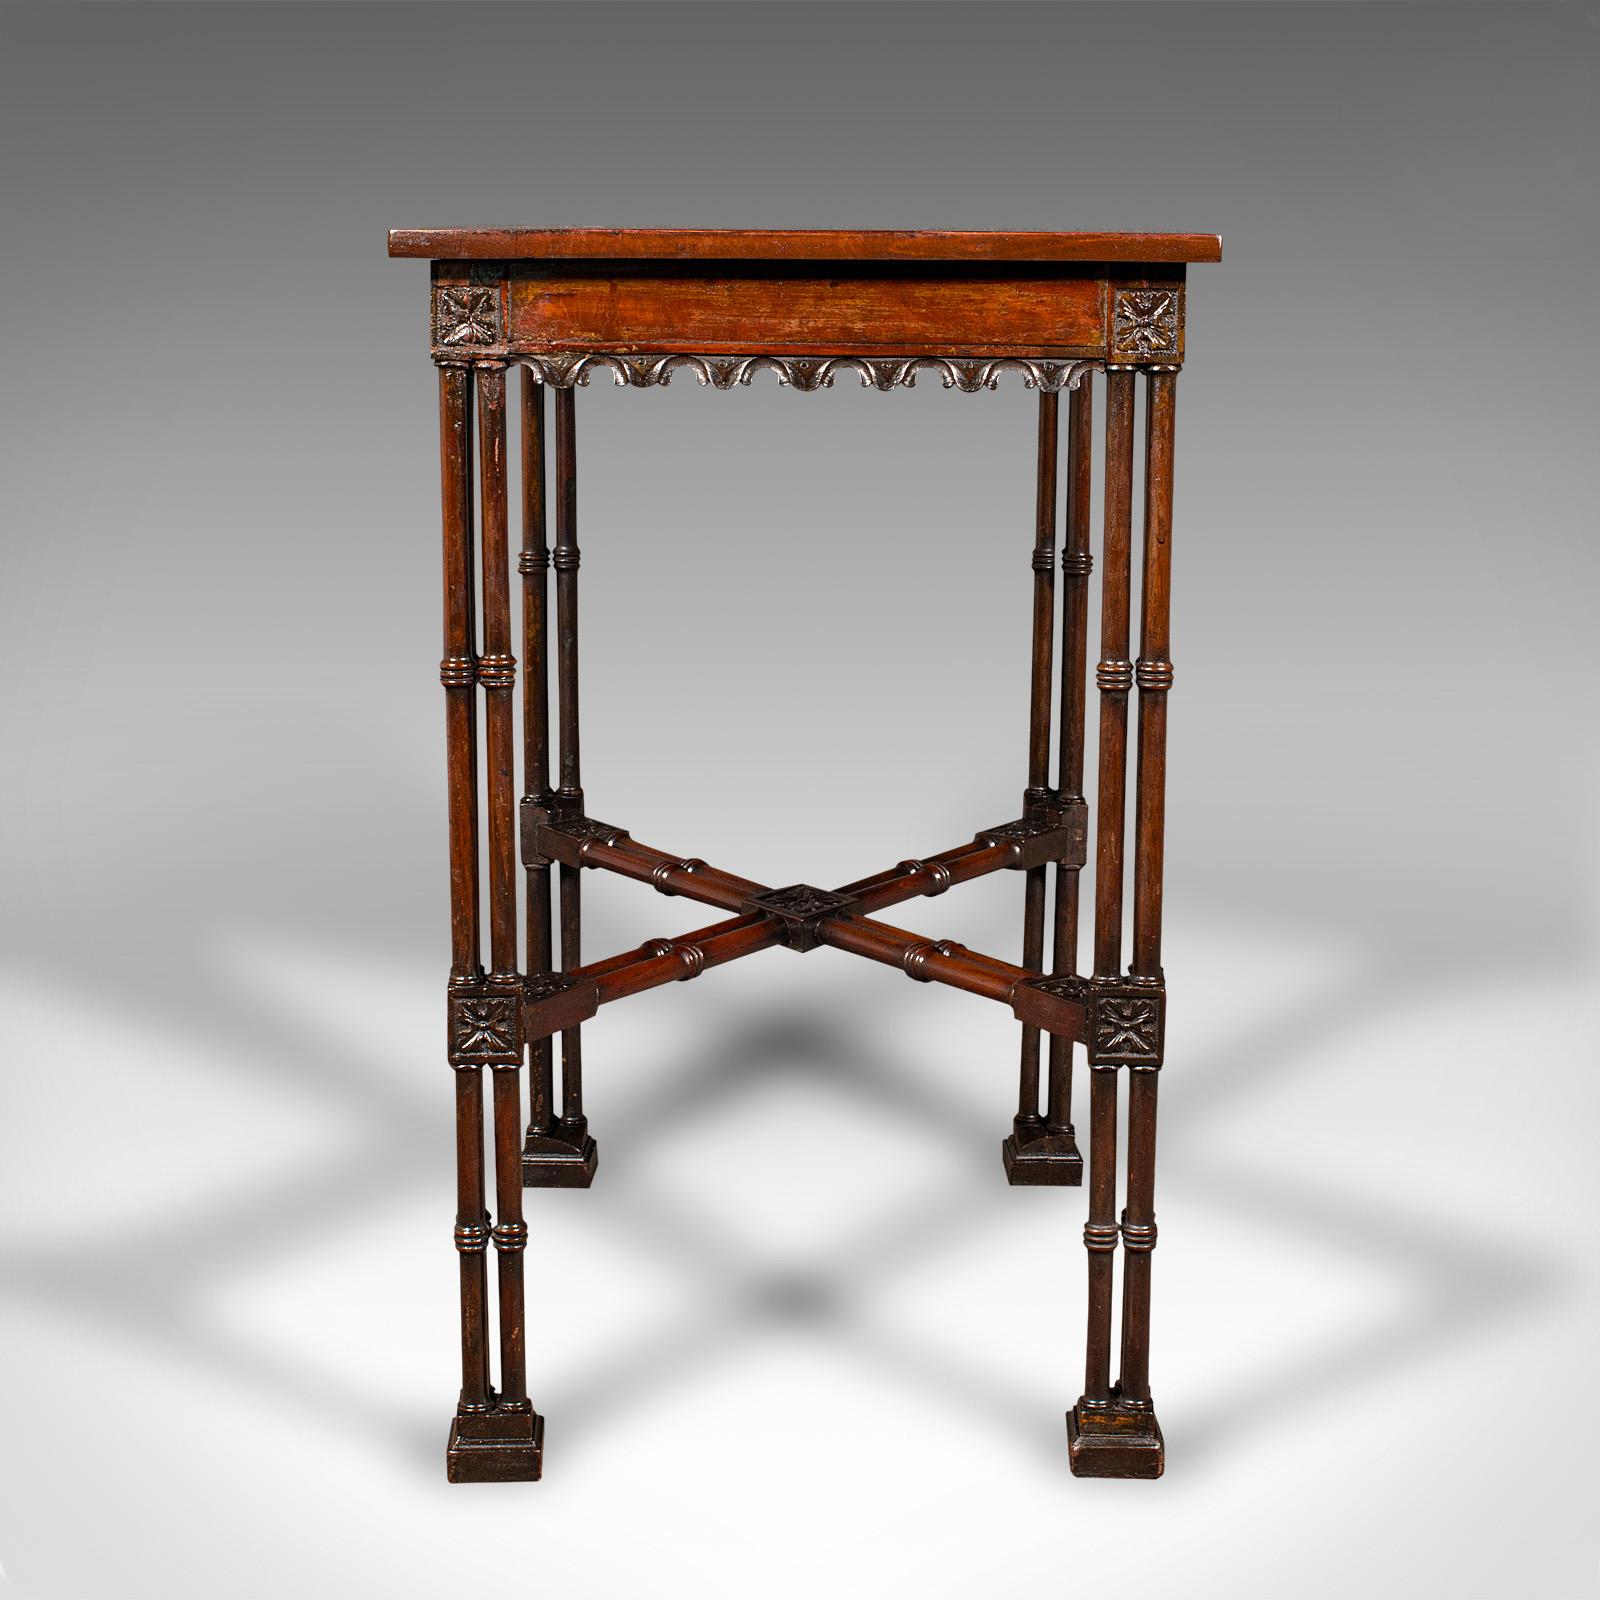 British Antique Side Table, English, Occasional, Chippendale Taste, Georgian, Circa 1800 For Sale